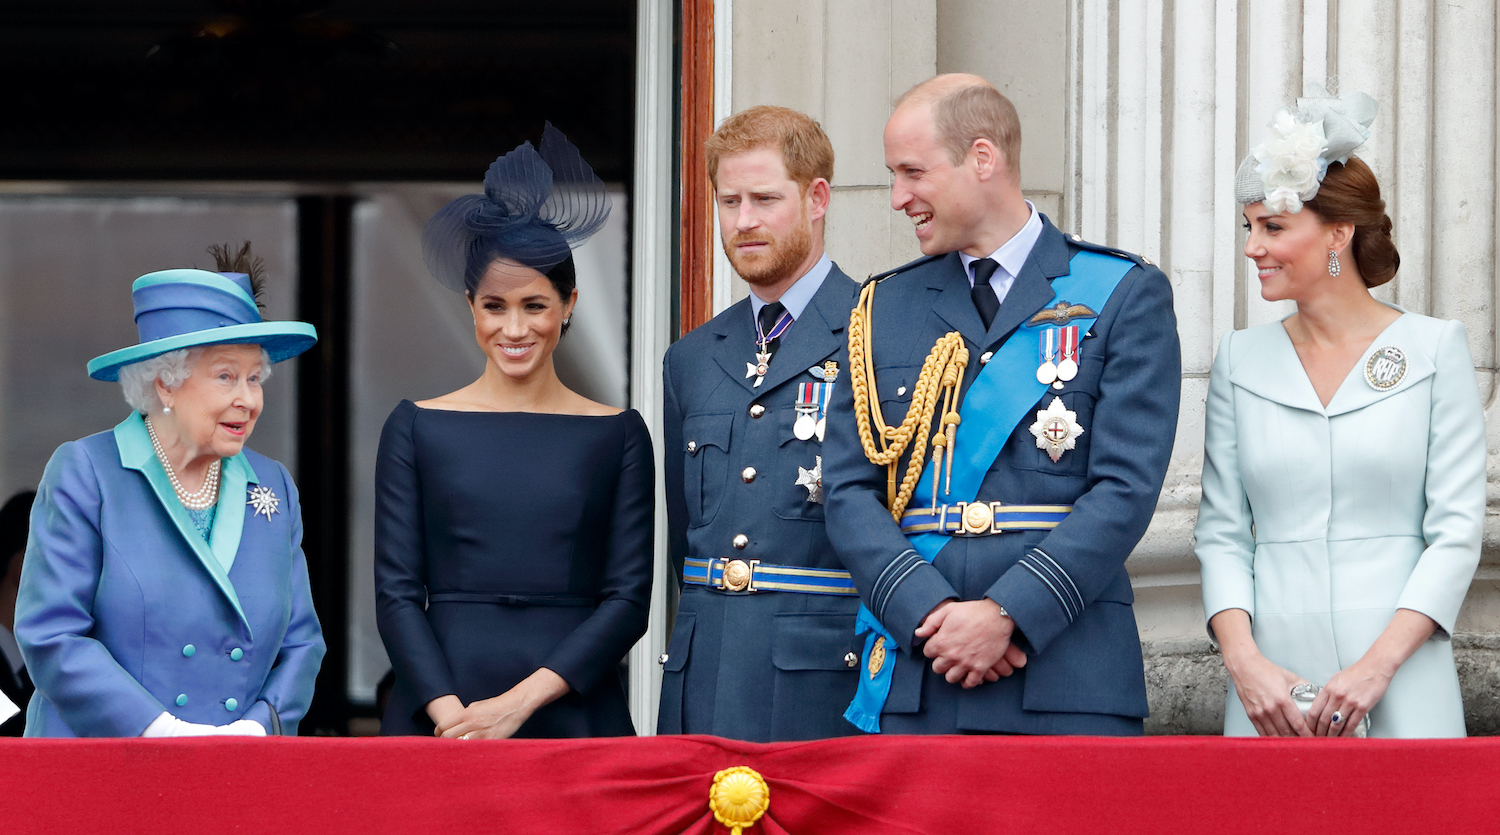 Queen Elizabeth II, Meghan Markle, Prince Harry, Prince William, and Kate Middleton on the Balcony of Buckingham Palace